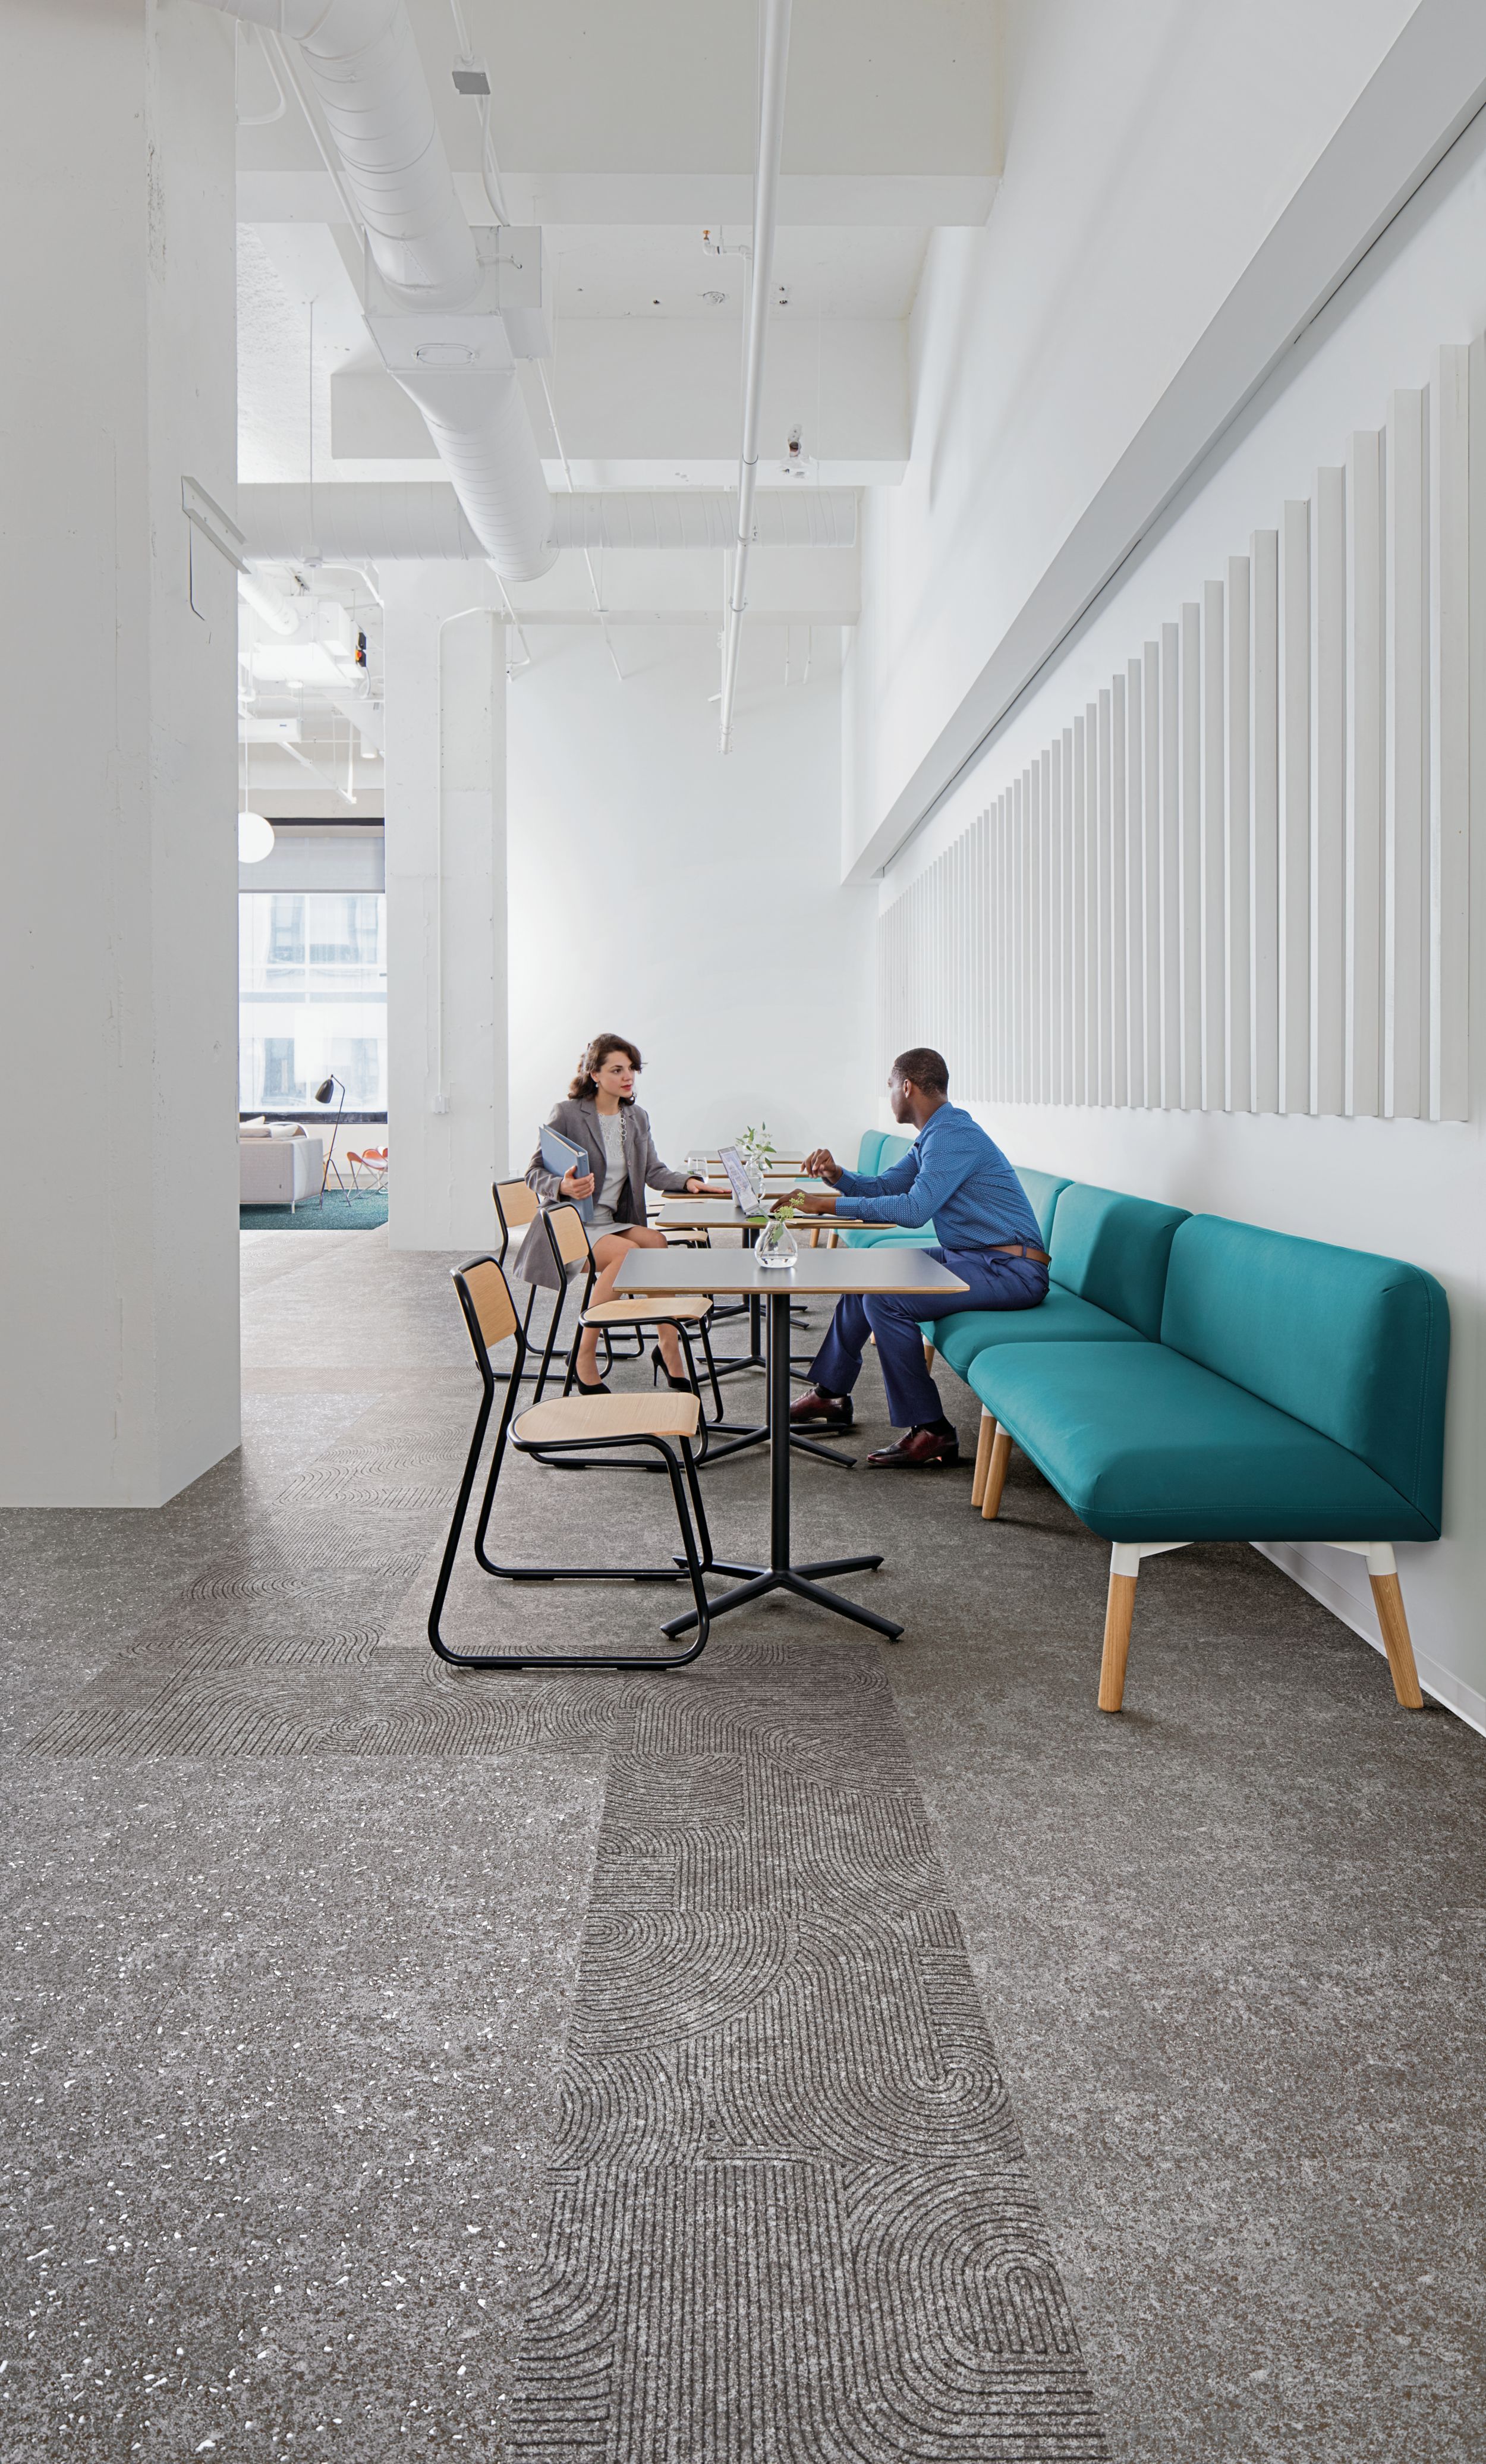 Interface Walk of Life, Walk About and Walk the Aisle LVT in an office break area numéro d’image 3